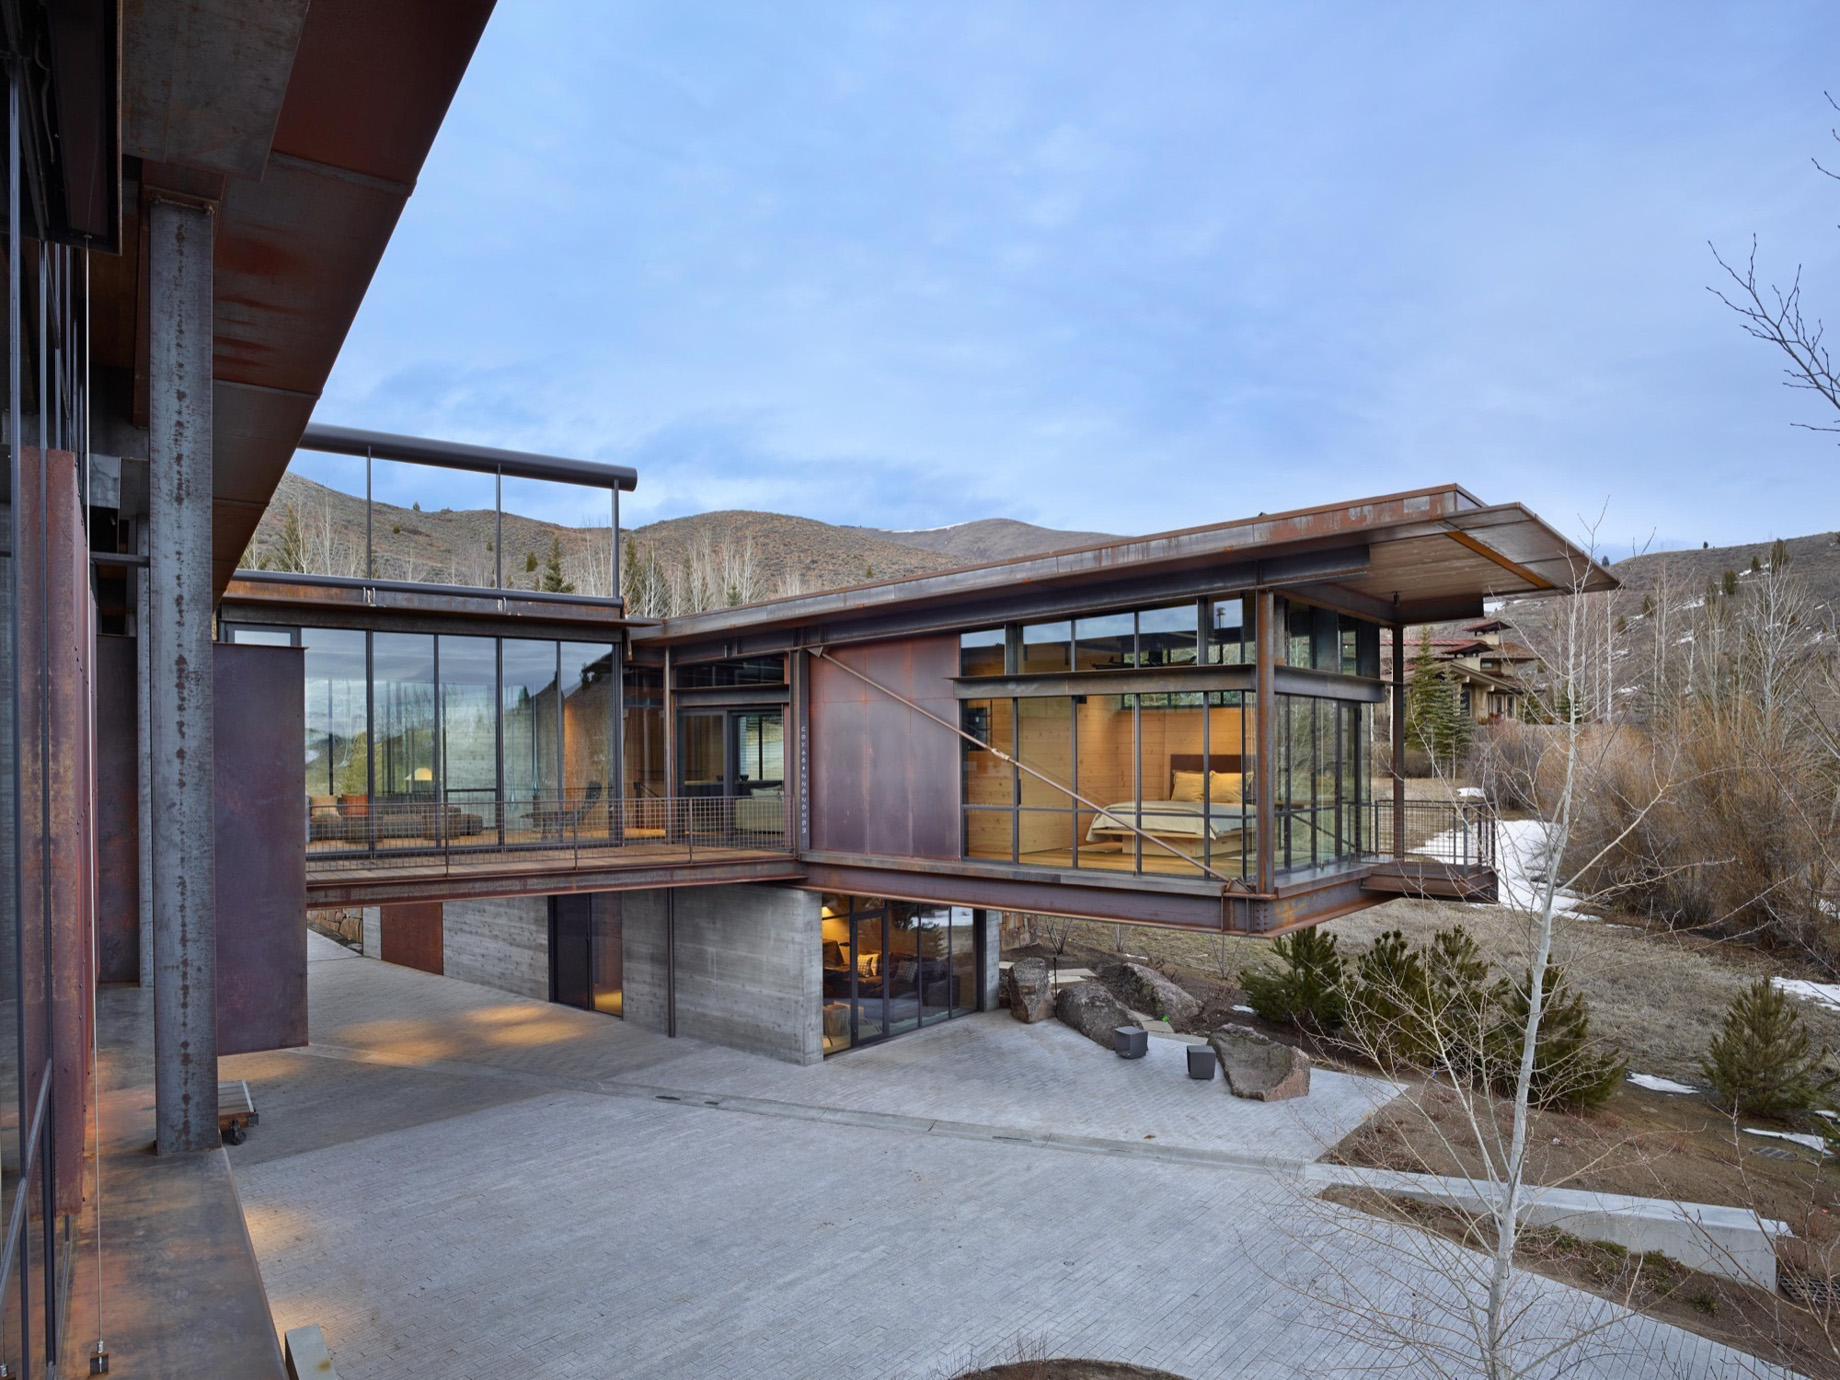 Bigwood Sun Valley Residence – Griffin Ct, Ketchum, ID, USA – Modern Industrial Home Design